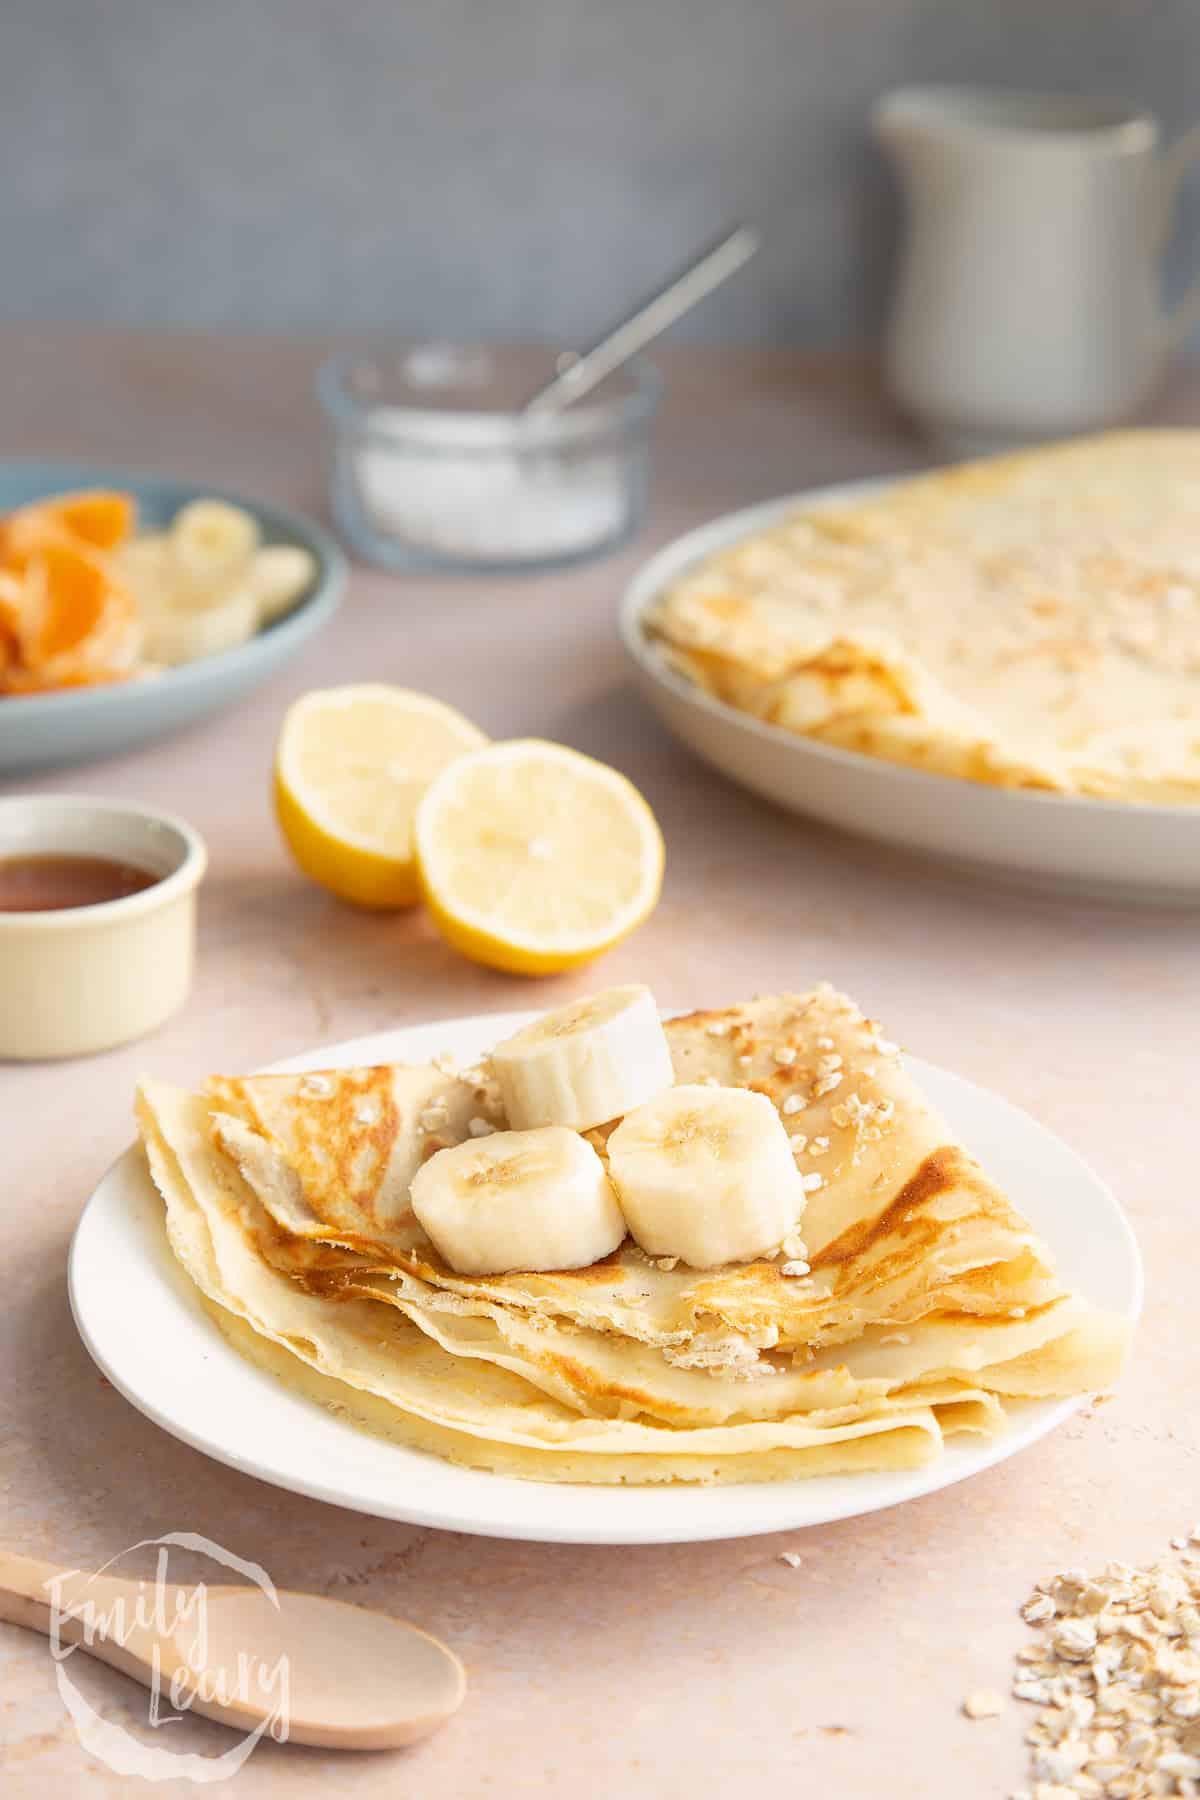 Gluten free crepe on a white plate. It is folded and topped with bananas.